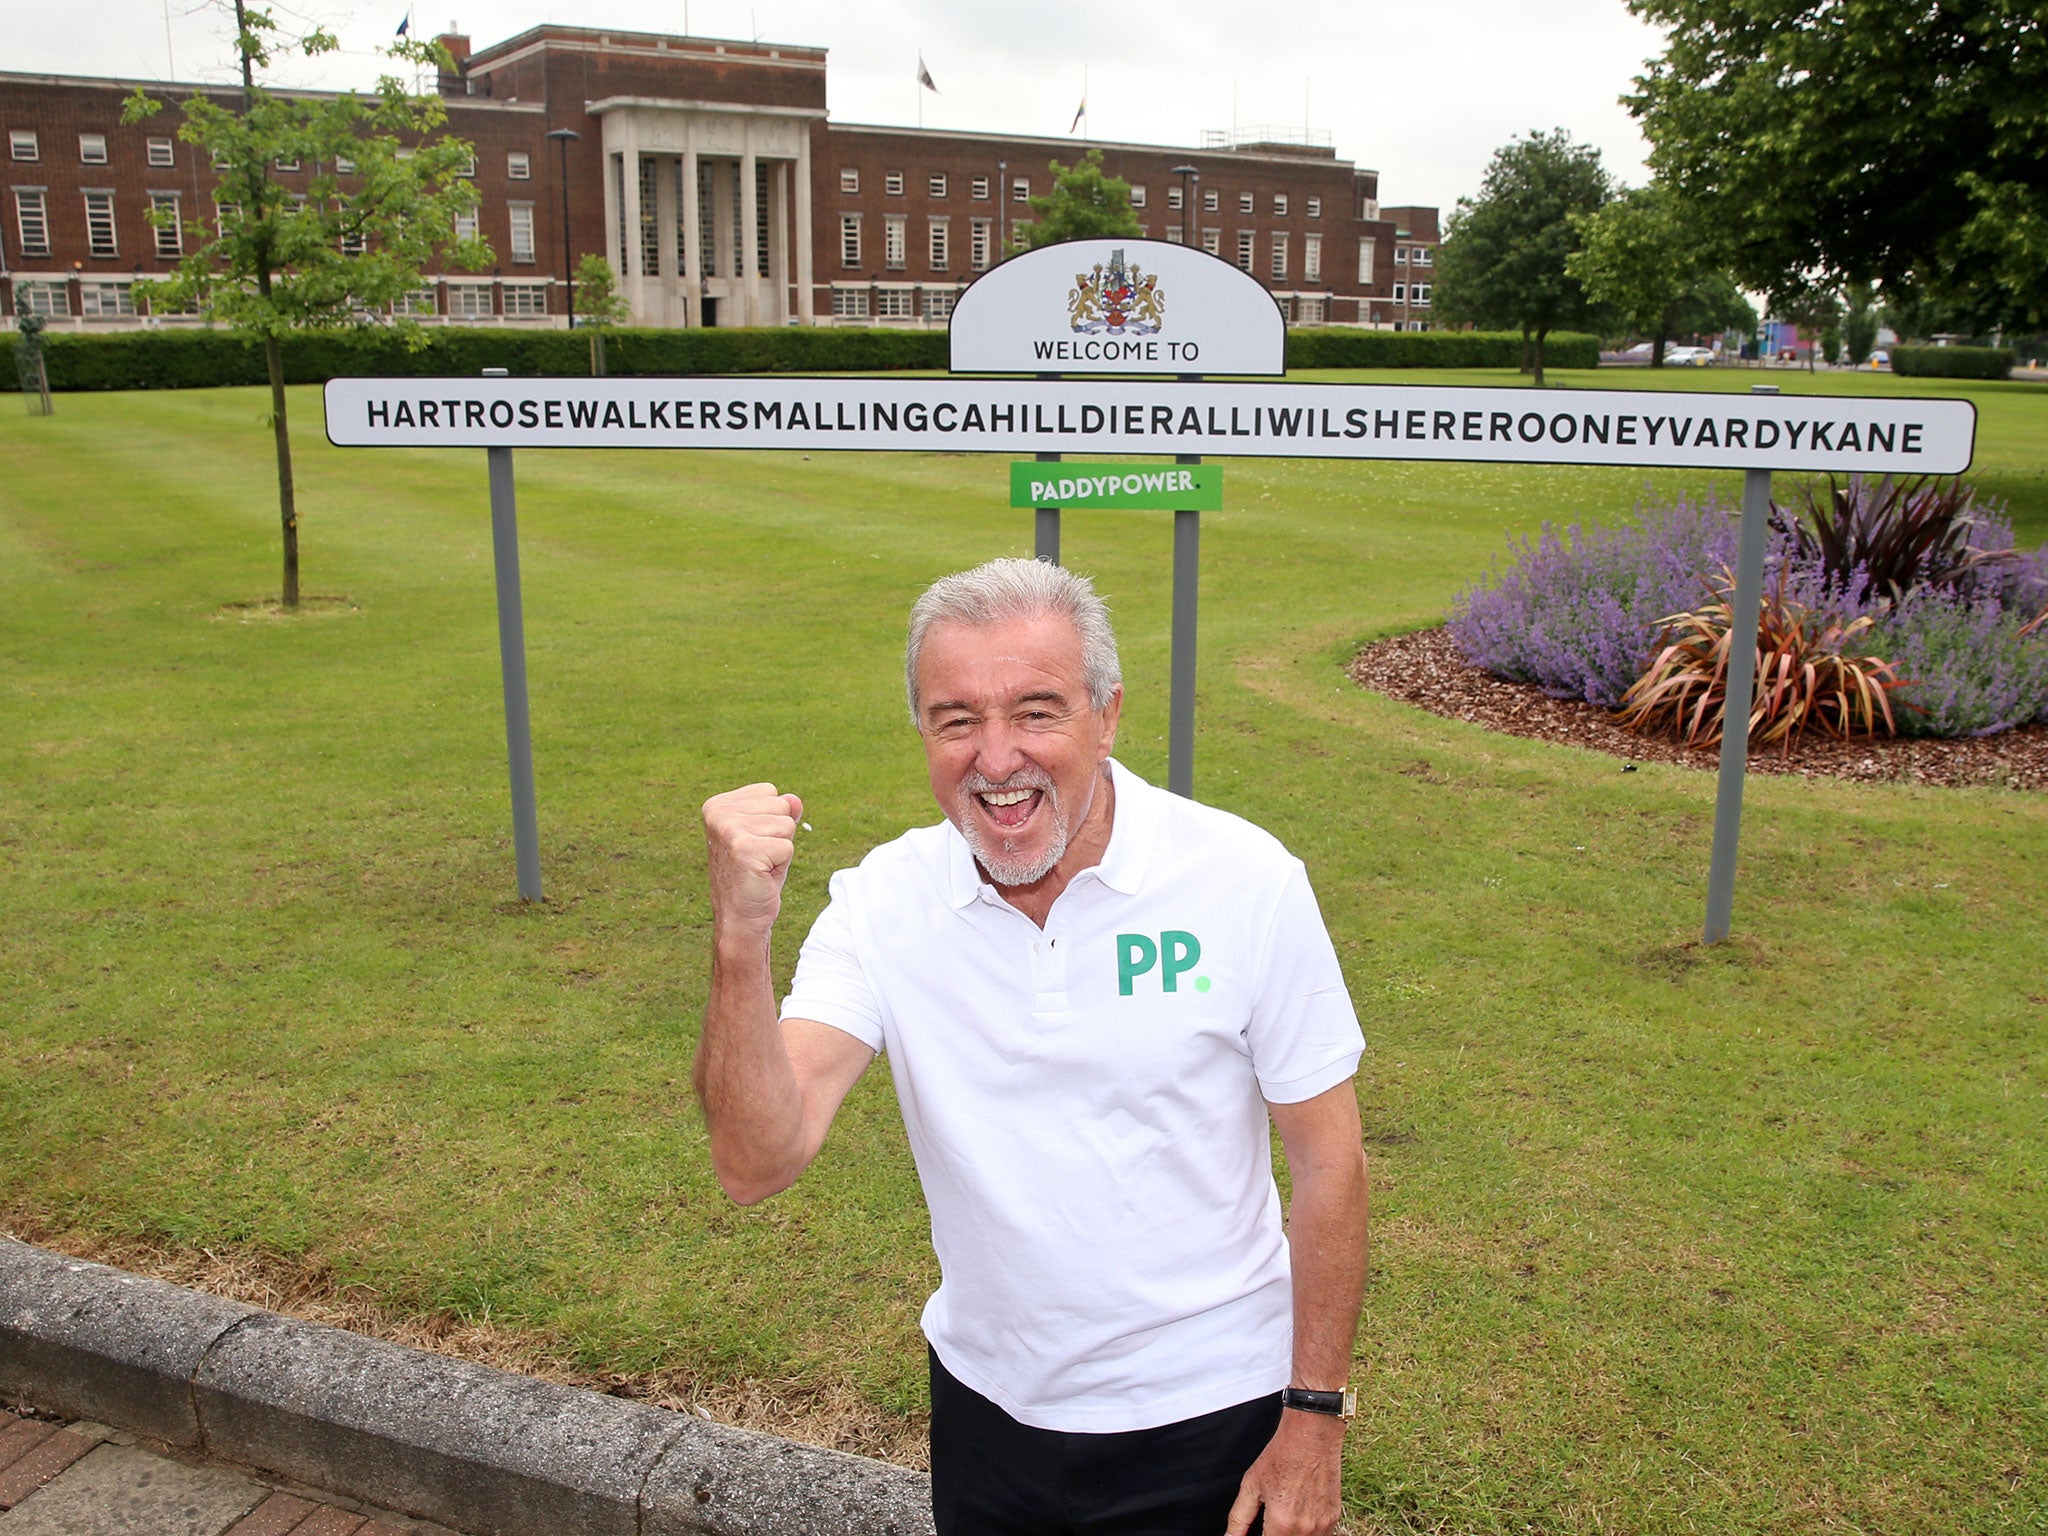 Terry Venables poses next to a sign renaming Dagenham to HartRoseWalkerSmallingCahillDierAlliWilshereRooneyVardyKane - one character longer than the longest place name in Wales - Llanfair­pwllgwyngyll­gogery­chwyrn­drobwll­llan­tysilio­gogo­goch. Bookmaker Paddy Power renamed the borough after Roy Hodgson's England team to deal Wales a blow ahead of the match on Thursday